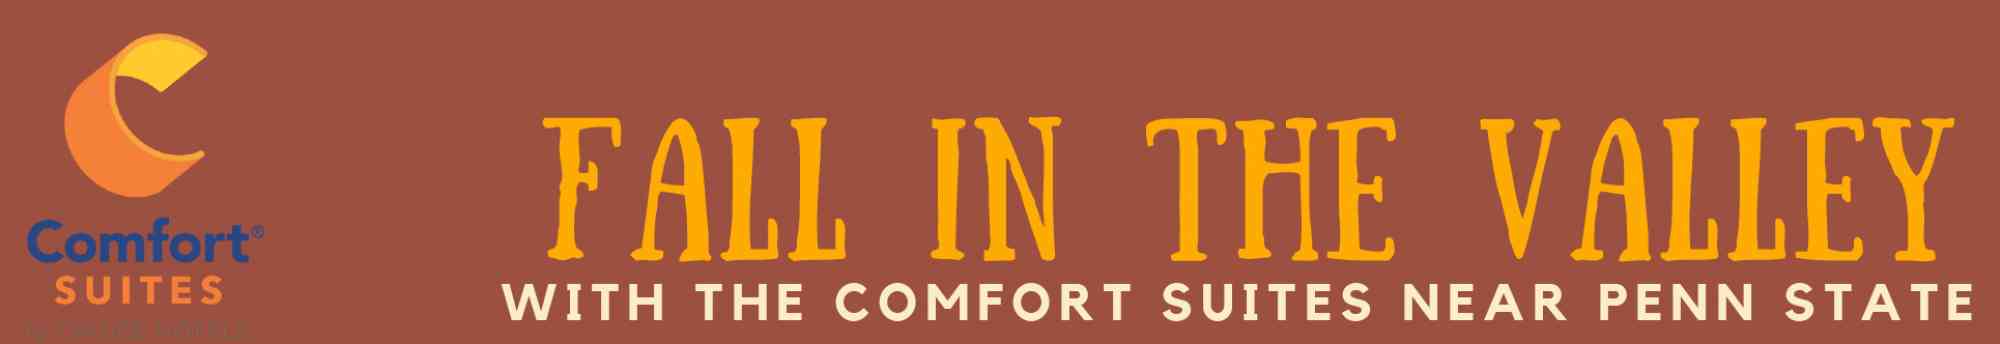 2021 Fall in the Valley Comfort Suites header